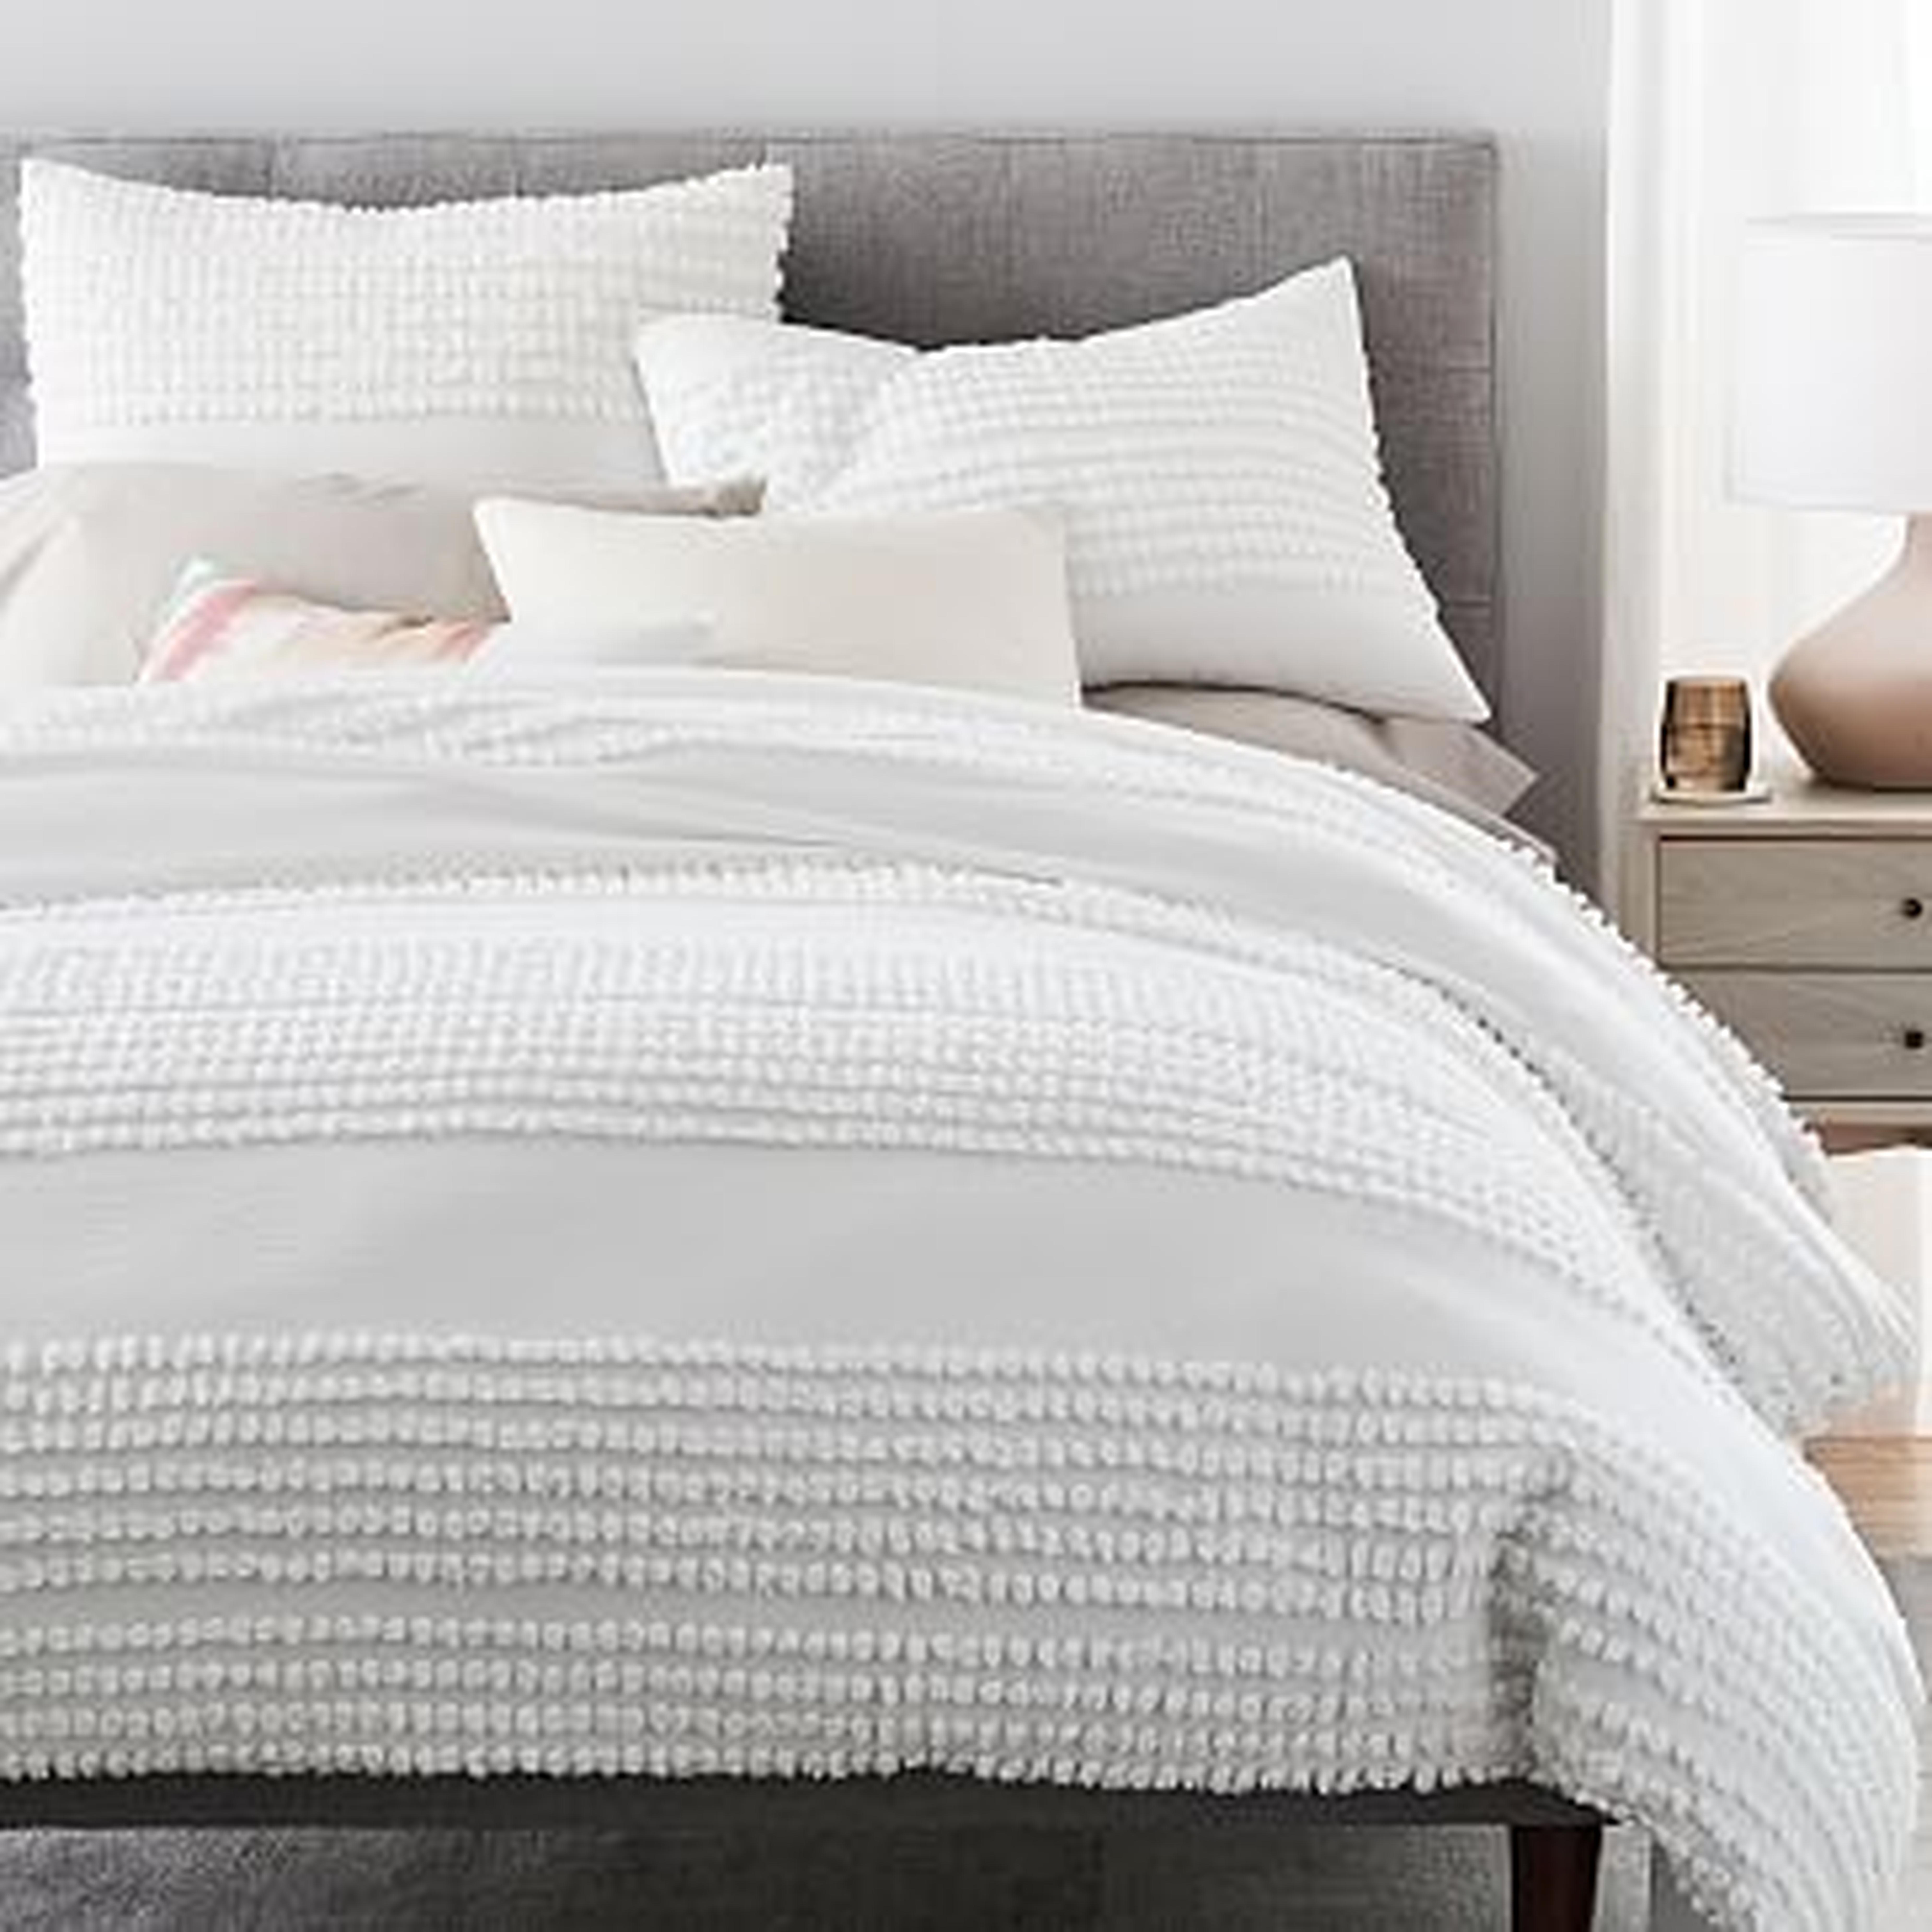 Candlewick Duvet Cover, Full/Queen, Stone White - West Elm